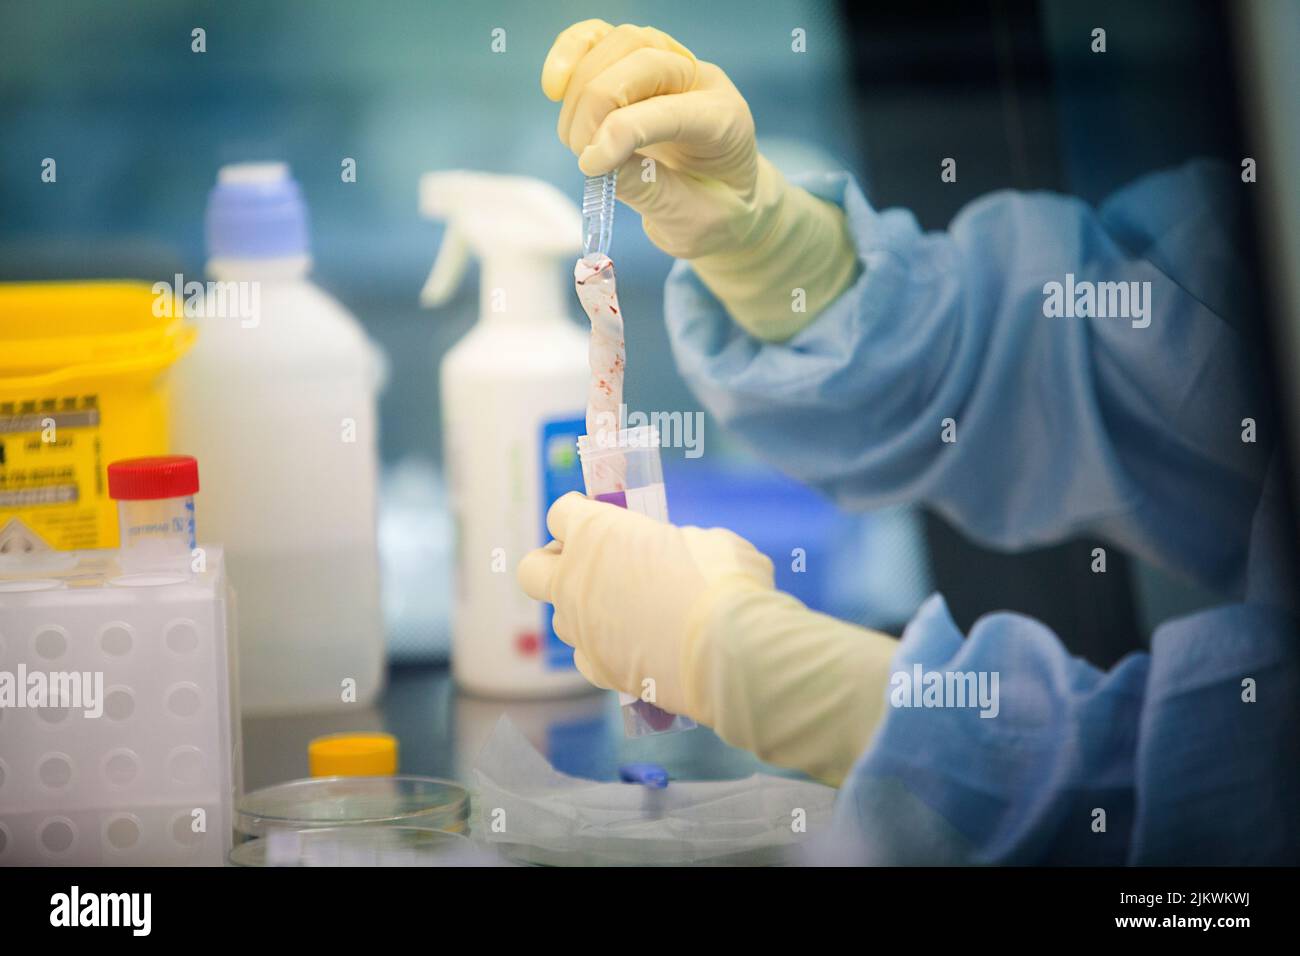 Biobank: umbilical cord tissue washed and stored before stem cell isolation. Stock Photo